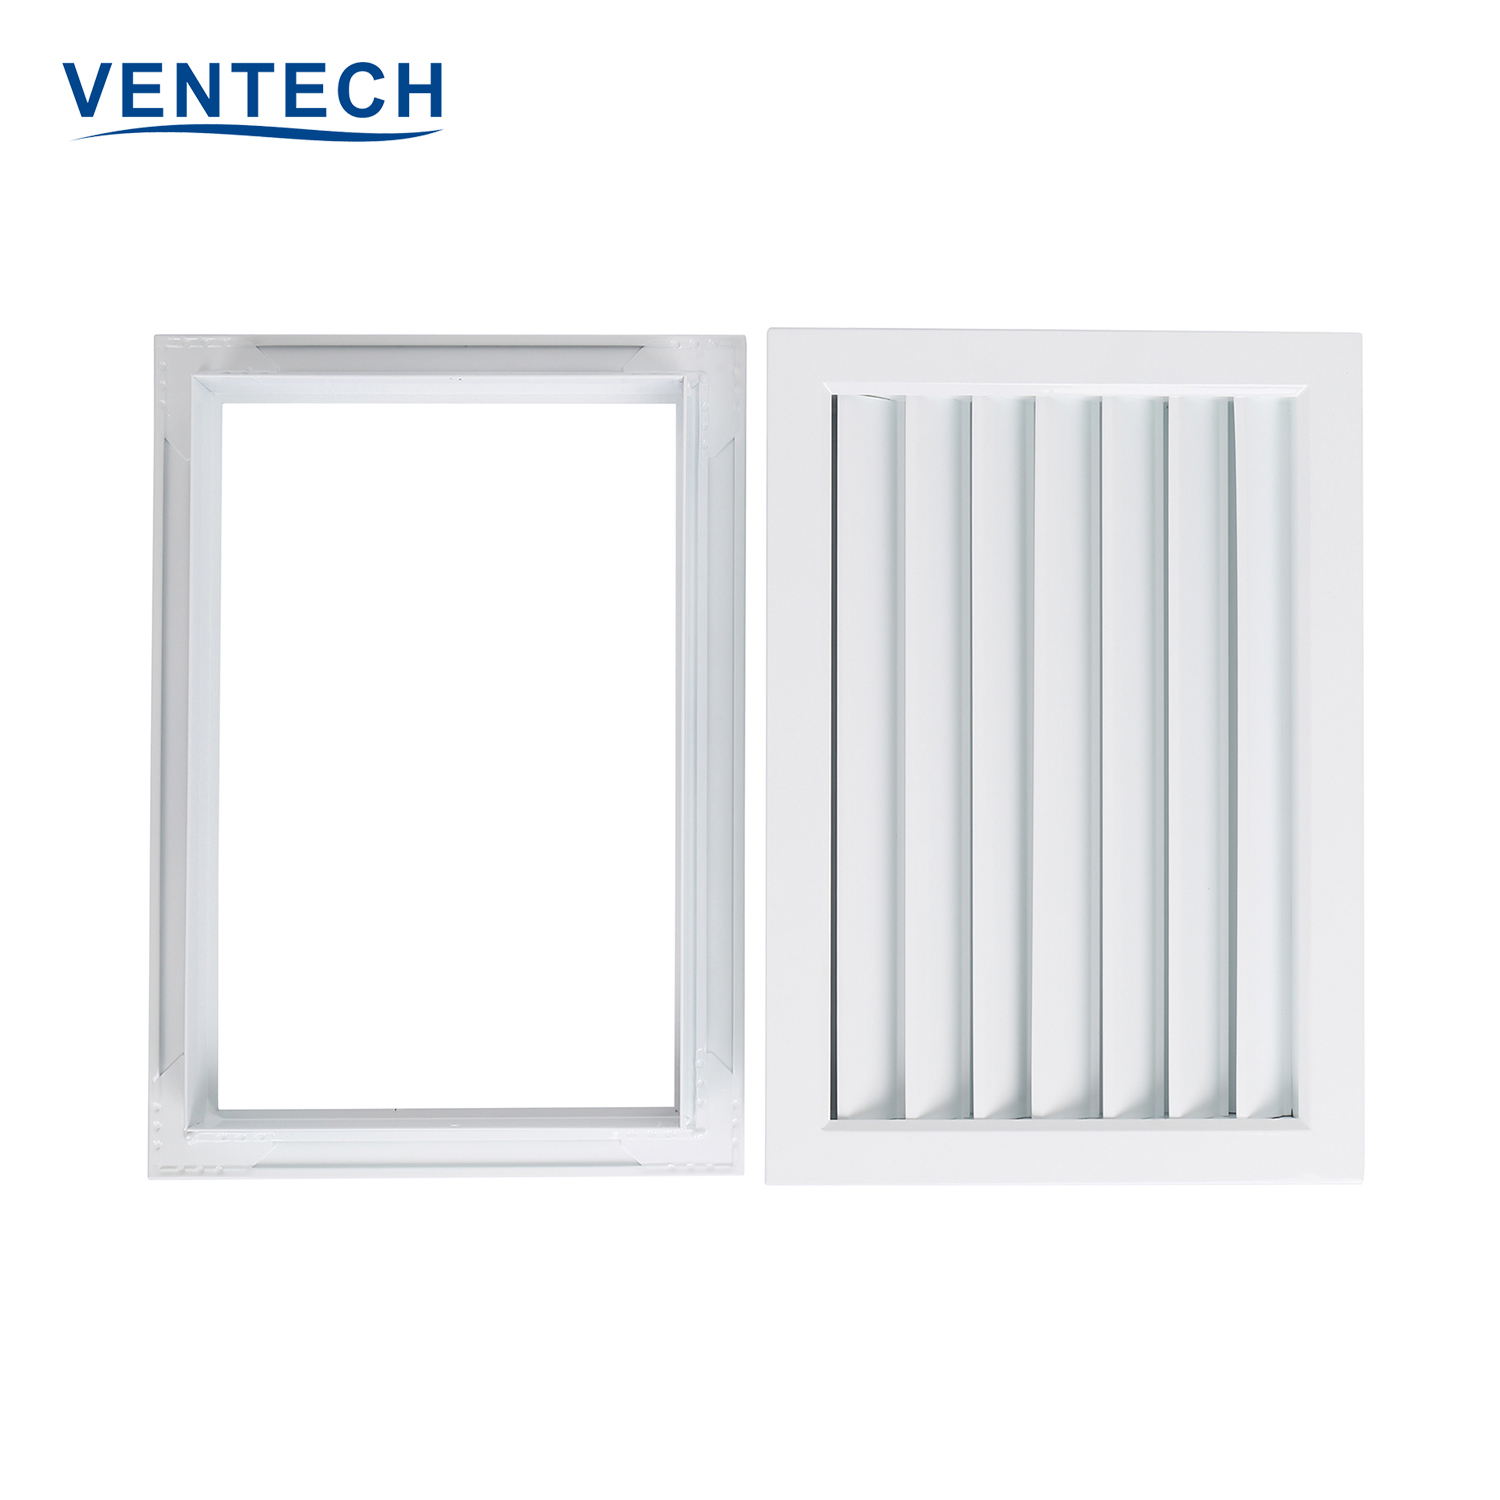 Ventech quality return air filter grille suppliers for air conditioning-1